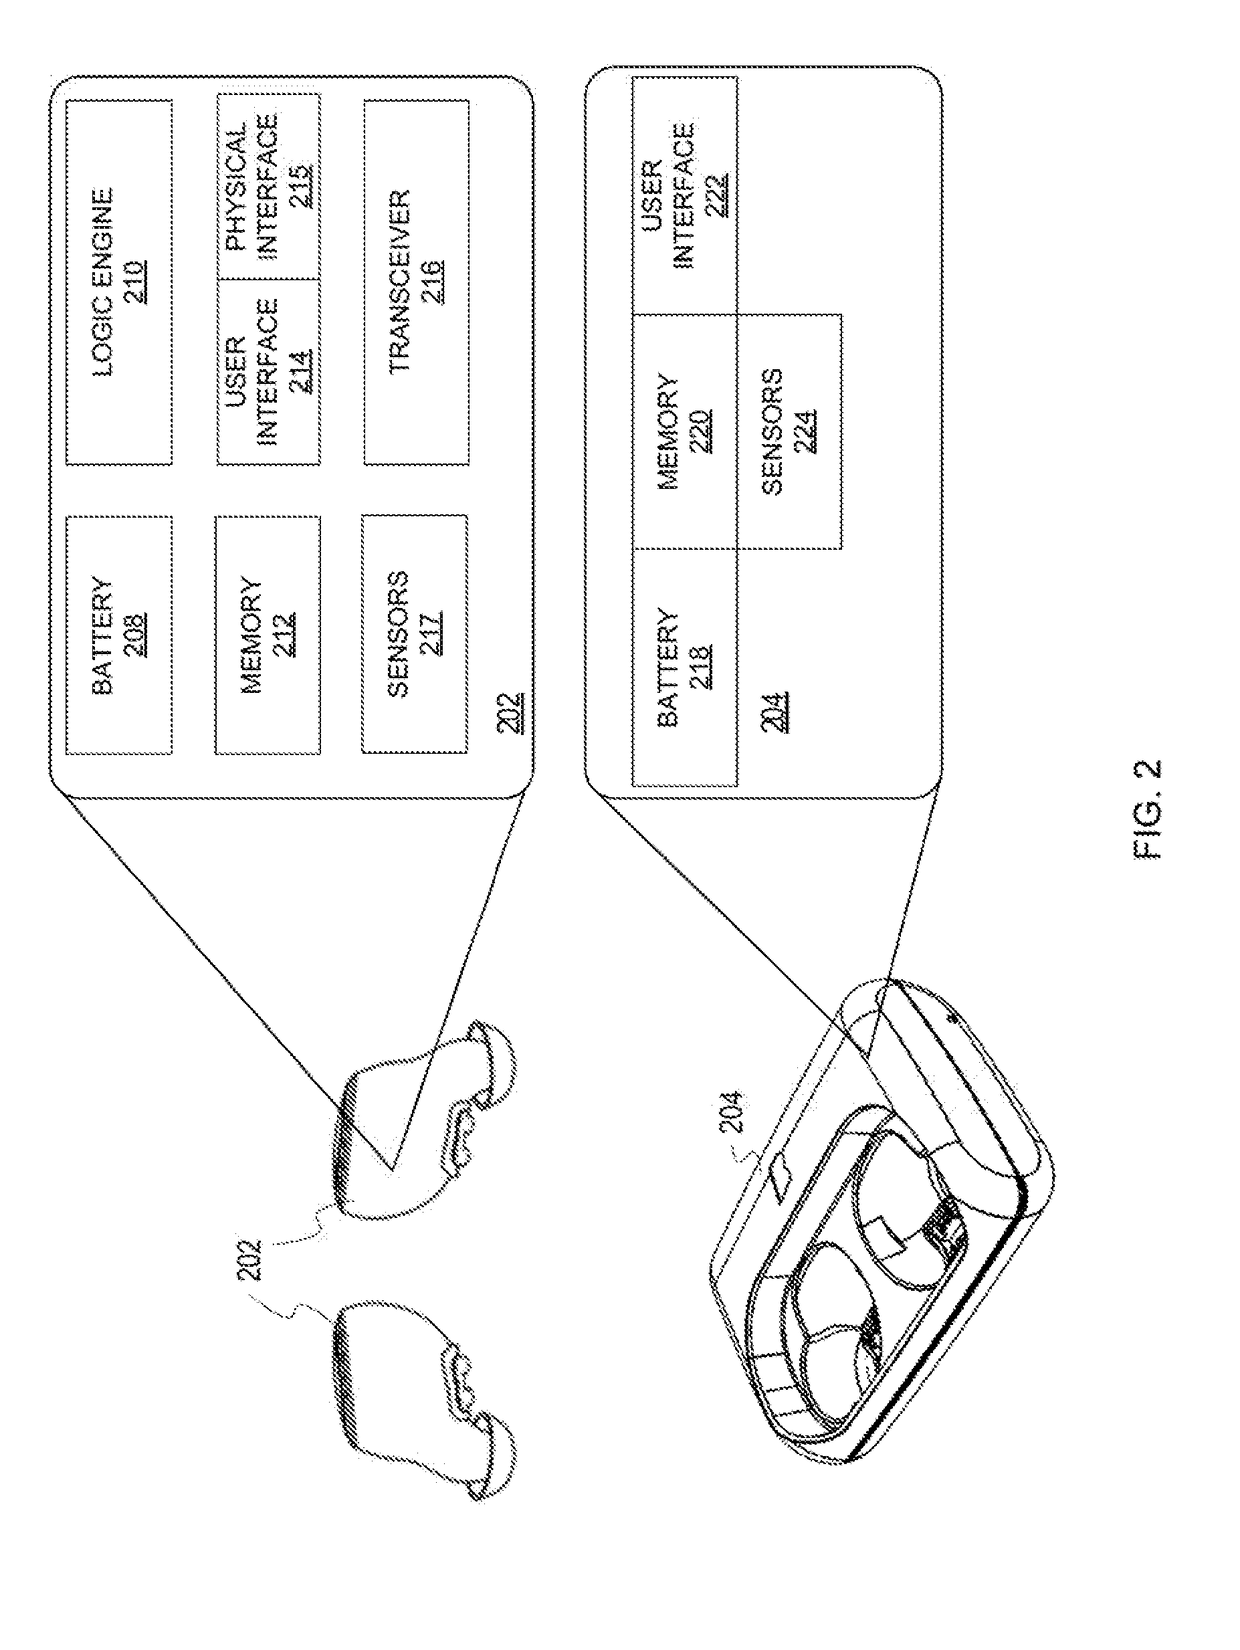 Multi-point Multiple Sensor Array for Data Sensing and Processing System and Method